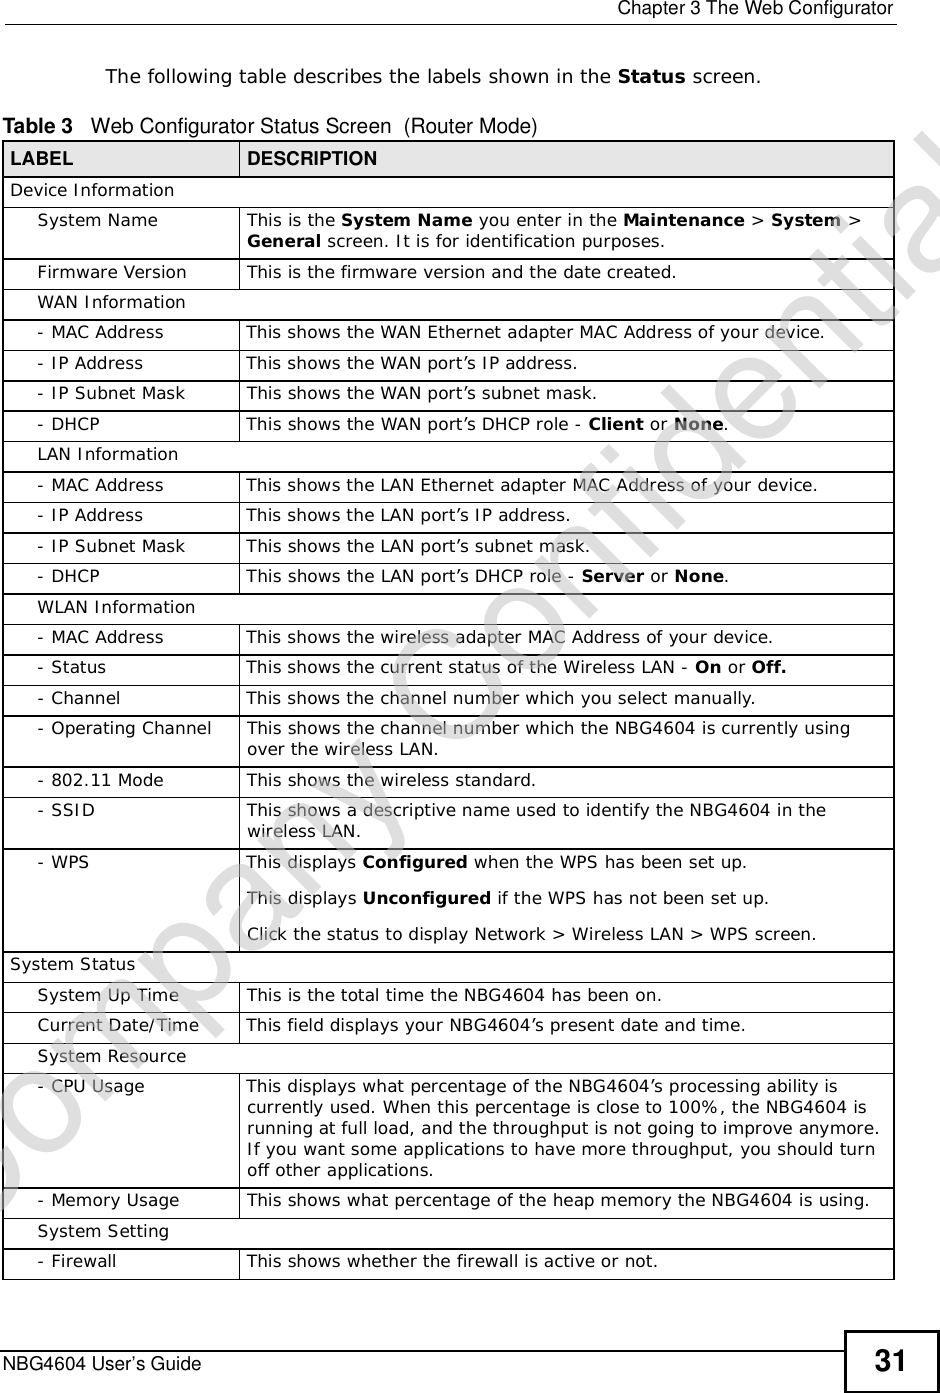  Chapter 3The Web ConfiguratorNBG4604 User’s Guide 31The following table describes the labels shown in the Status screen.Table 3   Web Configurator Status Screen  (Router Mode) LABEL DESCRIPTIONDevice InformationSystem NameThis is the System Name you enter in the Maintenance &gt; System &gt;General screen. It is for identification purposes.Firmware VersionThis is the firmware version and the date created. WAN Information- MAC AddressThis shows the WAN Ethernet adapter MAC Address of your device.- IP AddressThis shows the WAN port’s IP address.- IP Subnet MaskThis shows the WAN port’s subnet mask.- DHCPThis shows the WAN port’s DHCP role - Client or None.LAN Information- MAC AddressThis shows the LAN Ethernet adapter MAC Address of your device.- IP AddressThis shows the LAN port’s IP address.- IP Subnet MaskThis shows the LAN port’s subnet mask.- DHCPThis shows the LAN port’s DHCP role - Server or None.WLAN Information- MAC AddressThis shows the wireless adapter MAC Address of your device.- StatusThis shows the current status of the Wireless LAN - On or Off.- ChannelThis shows the channel number which you select manually.- Operating ChannelThis shows the channel number which the NBG4604 is currently using over the wireless LAN. - 802.11 ModeThis shows the wireless standard.- SSIDThis shows a descriptive name used to identify the NBG4604 in the wireless LAN. - WPSThis displays Configured when the WPS has been set up. This displays Unconfigured if the WPS has not been set up.Click the status to display Network &gt; Wireless LAN &gt; WPS screen.System StatusSystem Up TimeThis is the total time the NBG4604 has been on.Current Date/TimeThis field displays your NBG4604’s present date and time.System Resource- CPU UsageThis displays what percentage of the NBG4604’s processing ability is currently used. When this percentage is close to 100%, the NBG4604 is running at full load, and the throughput is not going to improve anymore. If you want some applications to have more throughput, you should turn off other applications.- Memory UsageThis shows what percentage of the heap memory the NBG4604 is using. System Setting- FirewallThis shows whether the firewall is active or not.Company Confidential